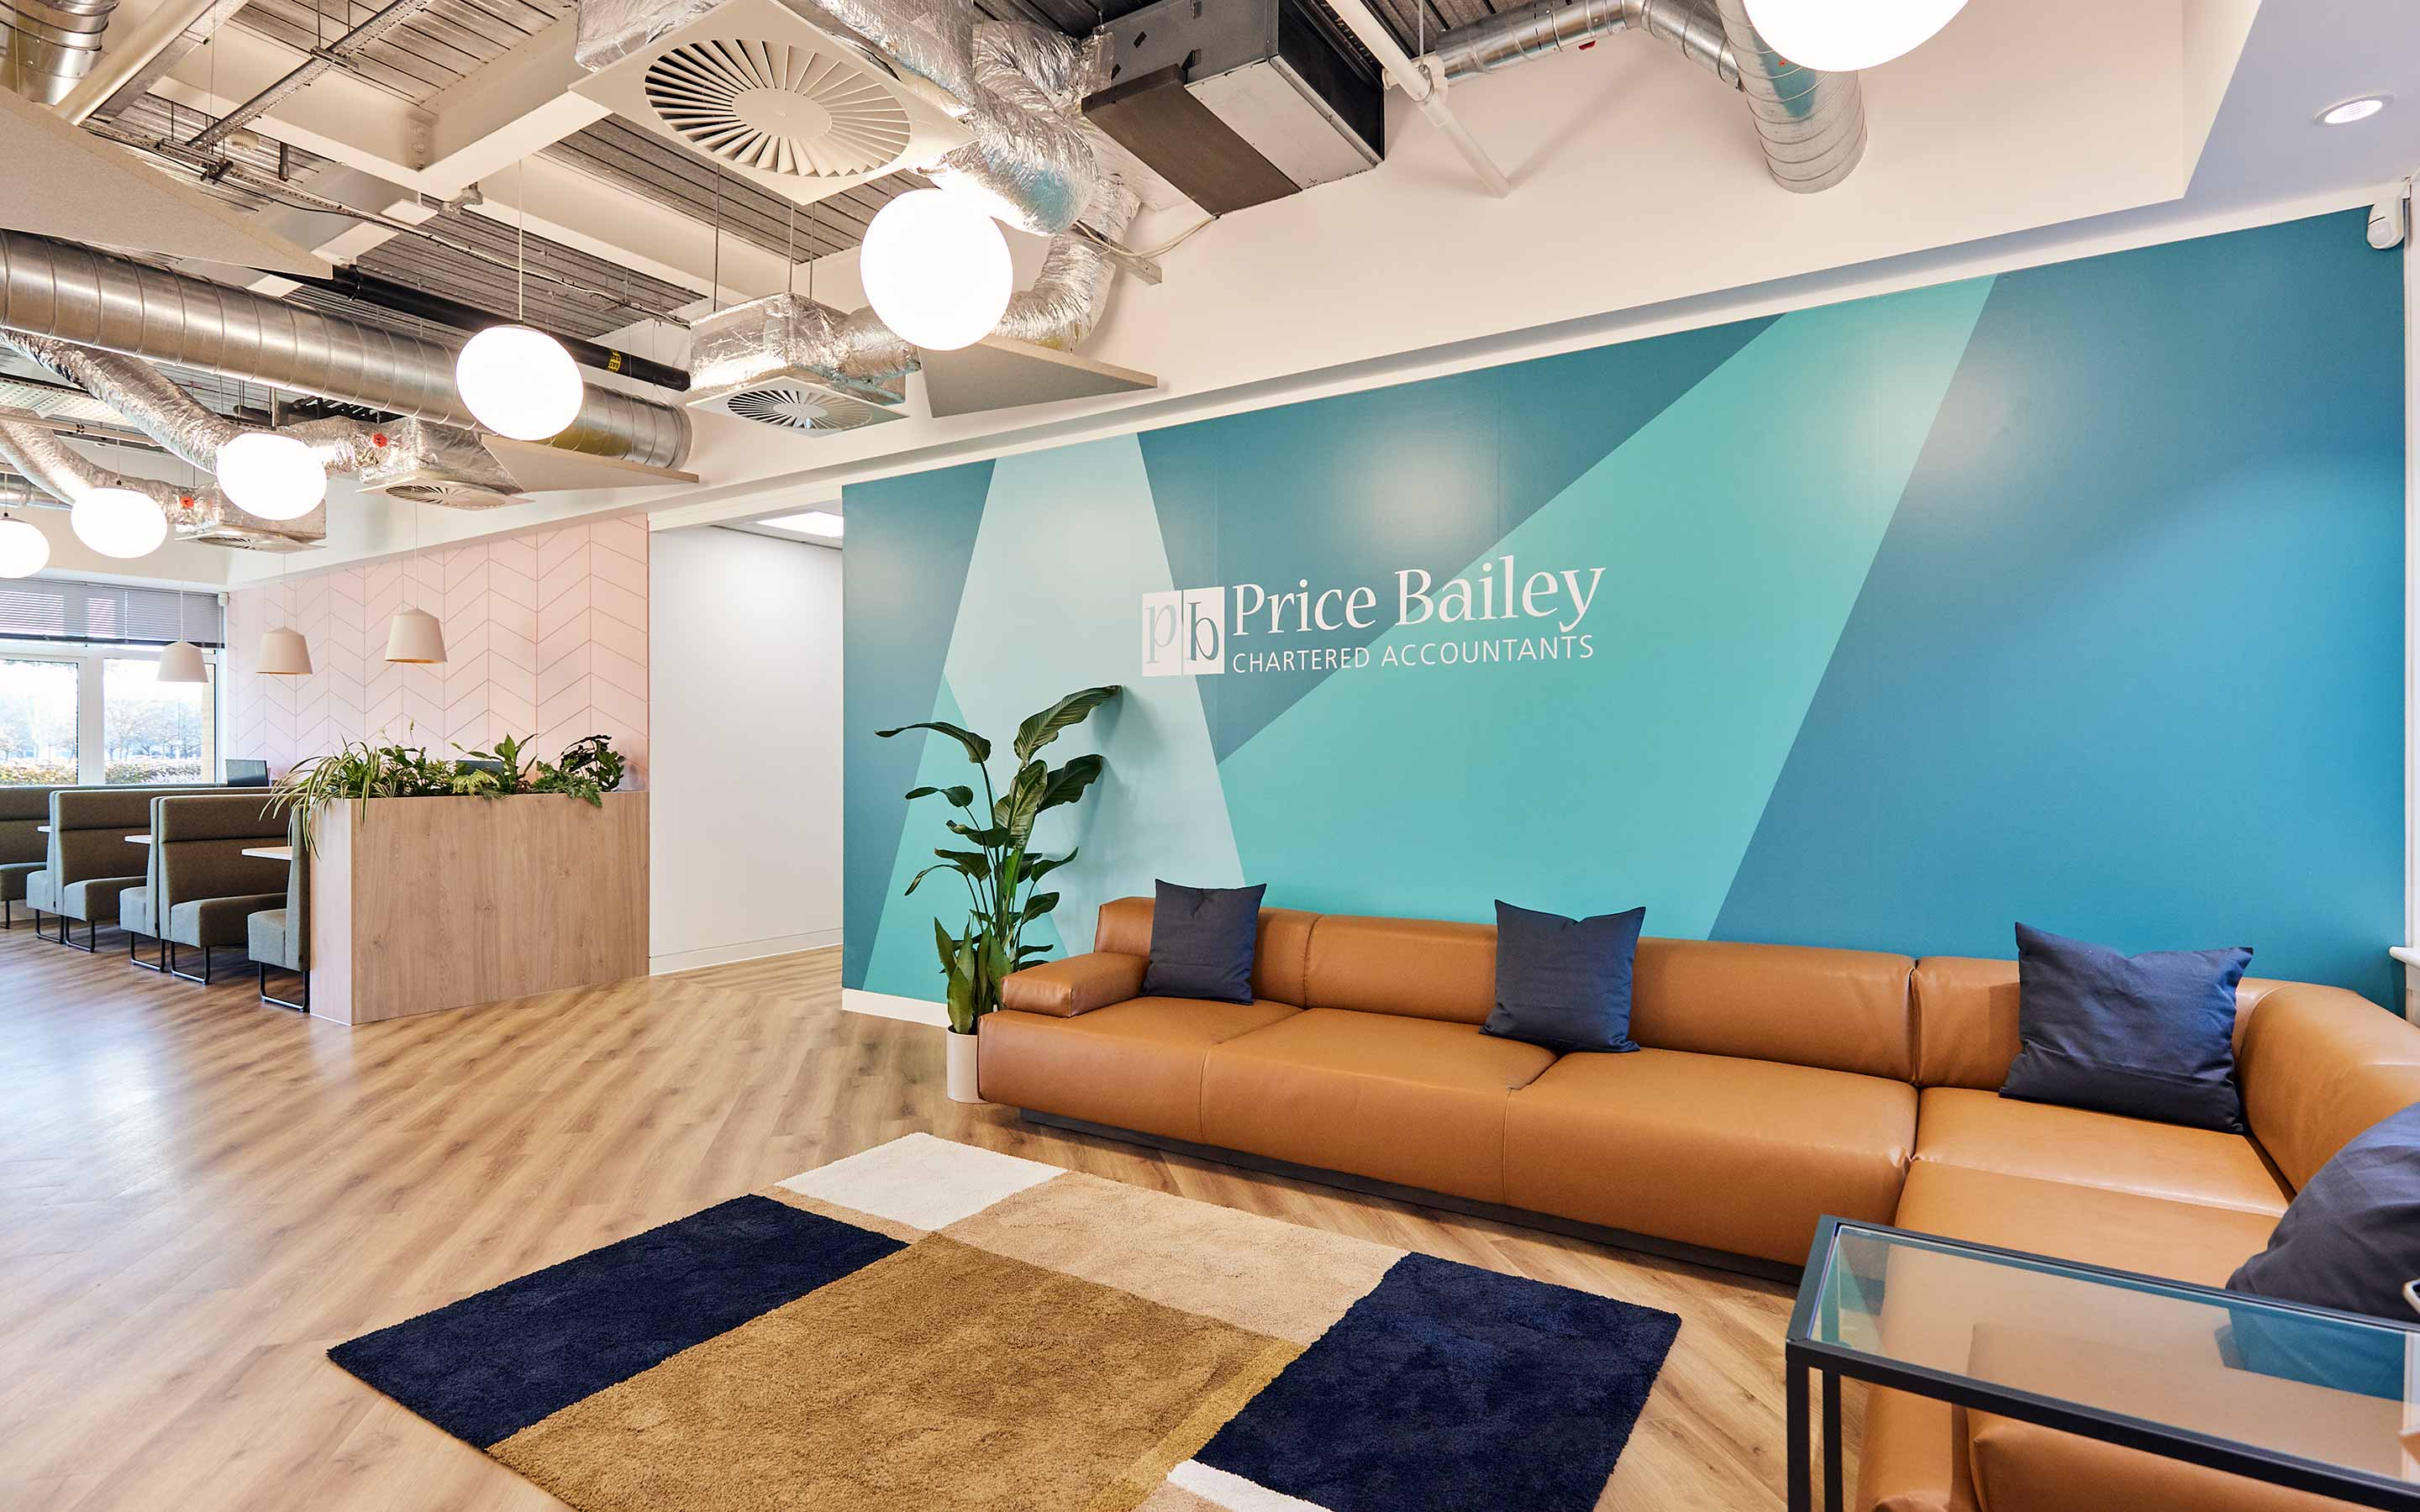 A professionally designed office interior with a focus on workplace functionality and an attractive reception area with blue walls and brown sofas